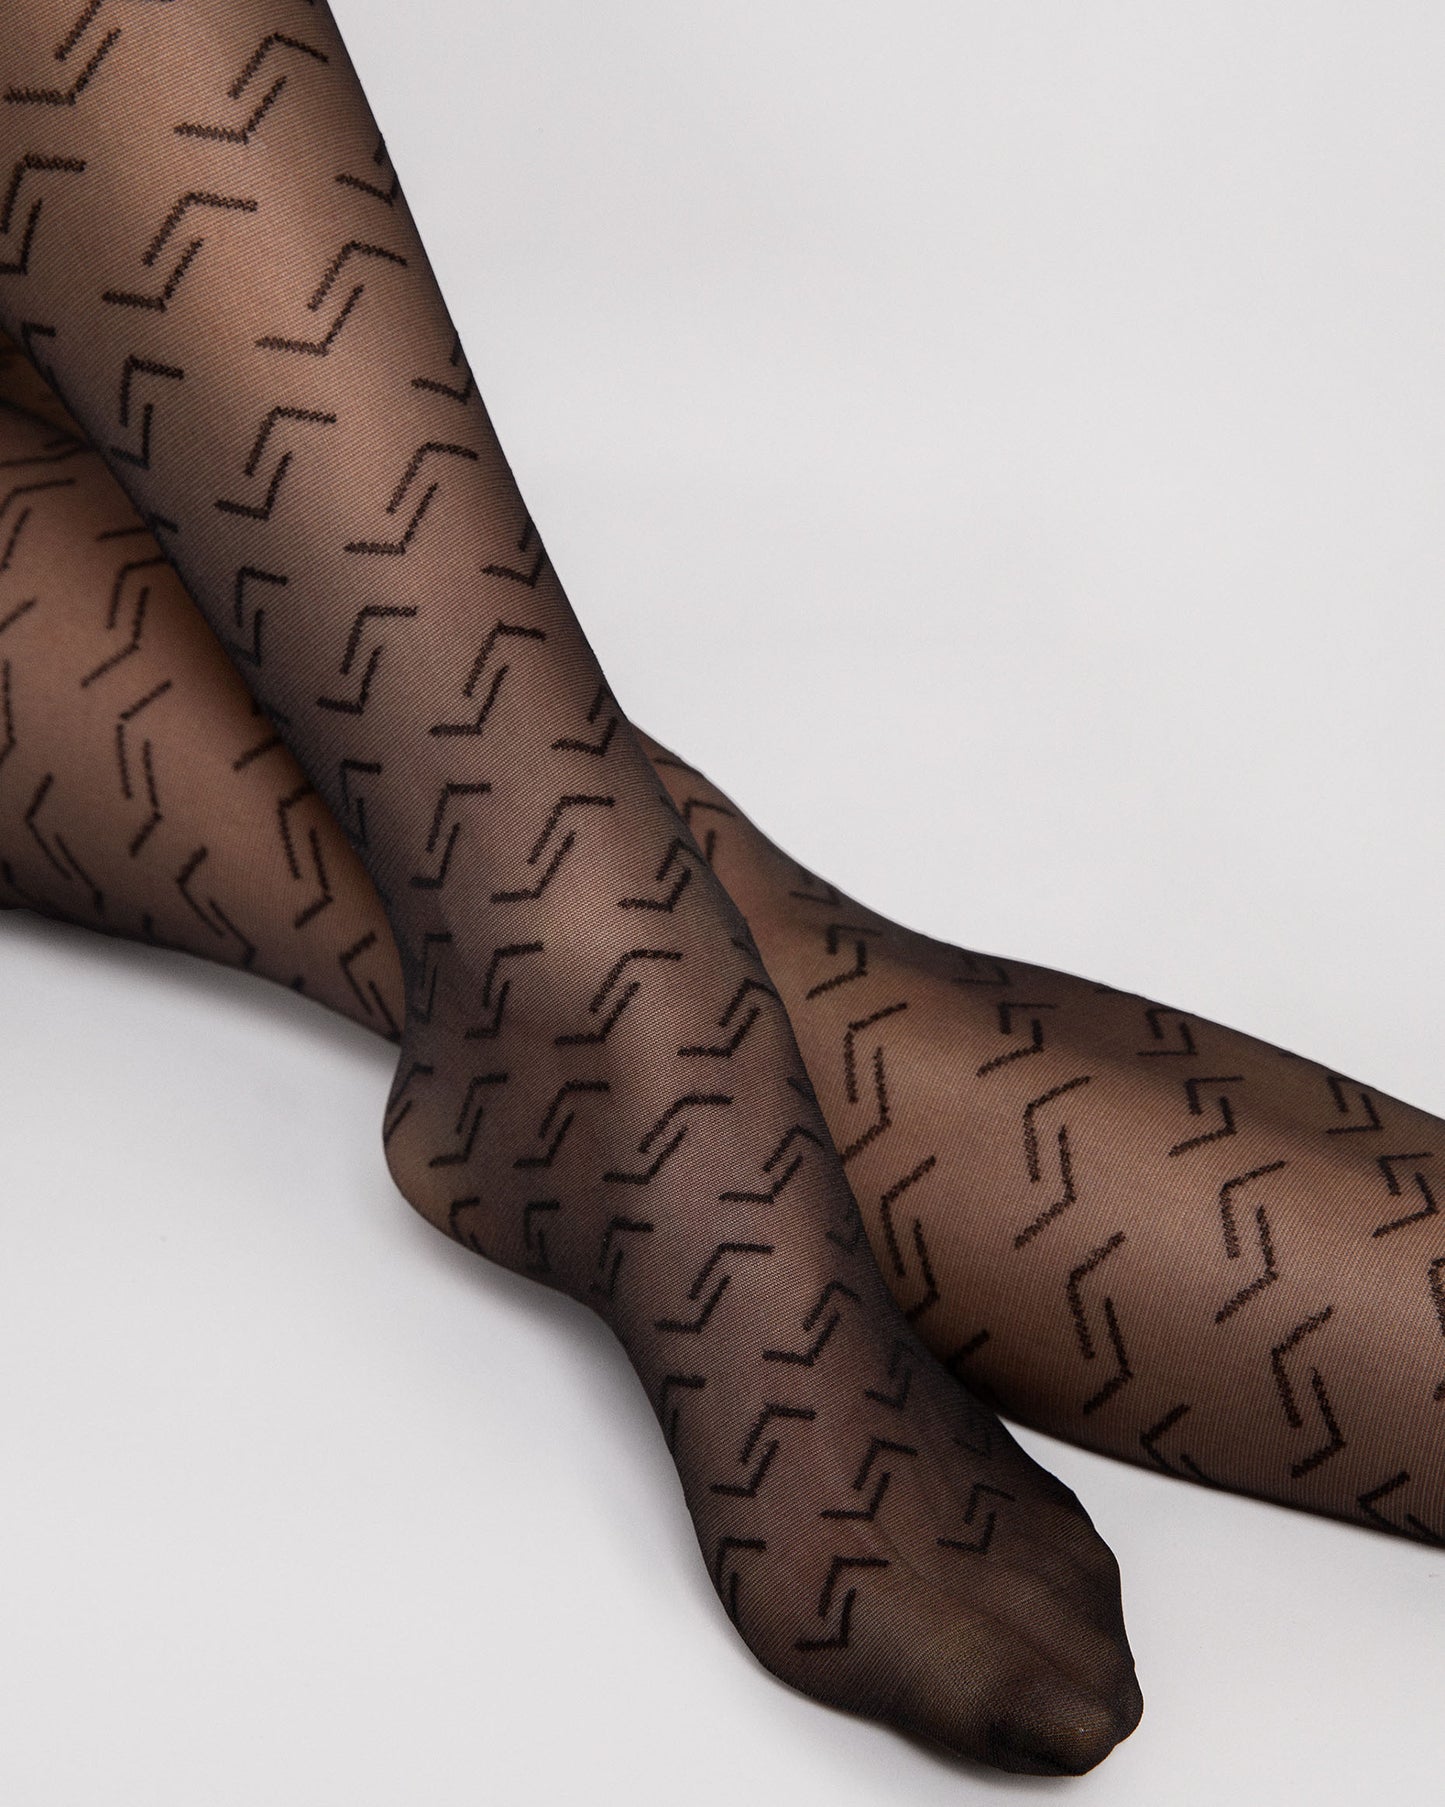 Fiore Staple Tights - Sheer black fashion tights with a geometric linear pattern, reinforced boxer top brief and reinforced toe.